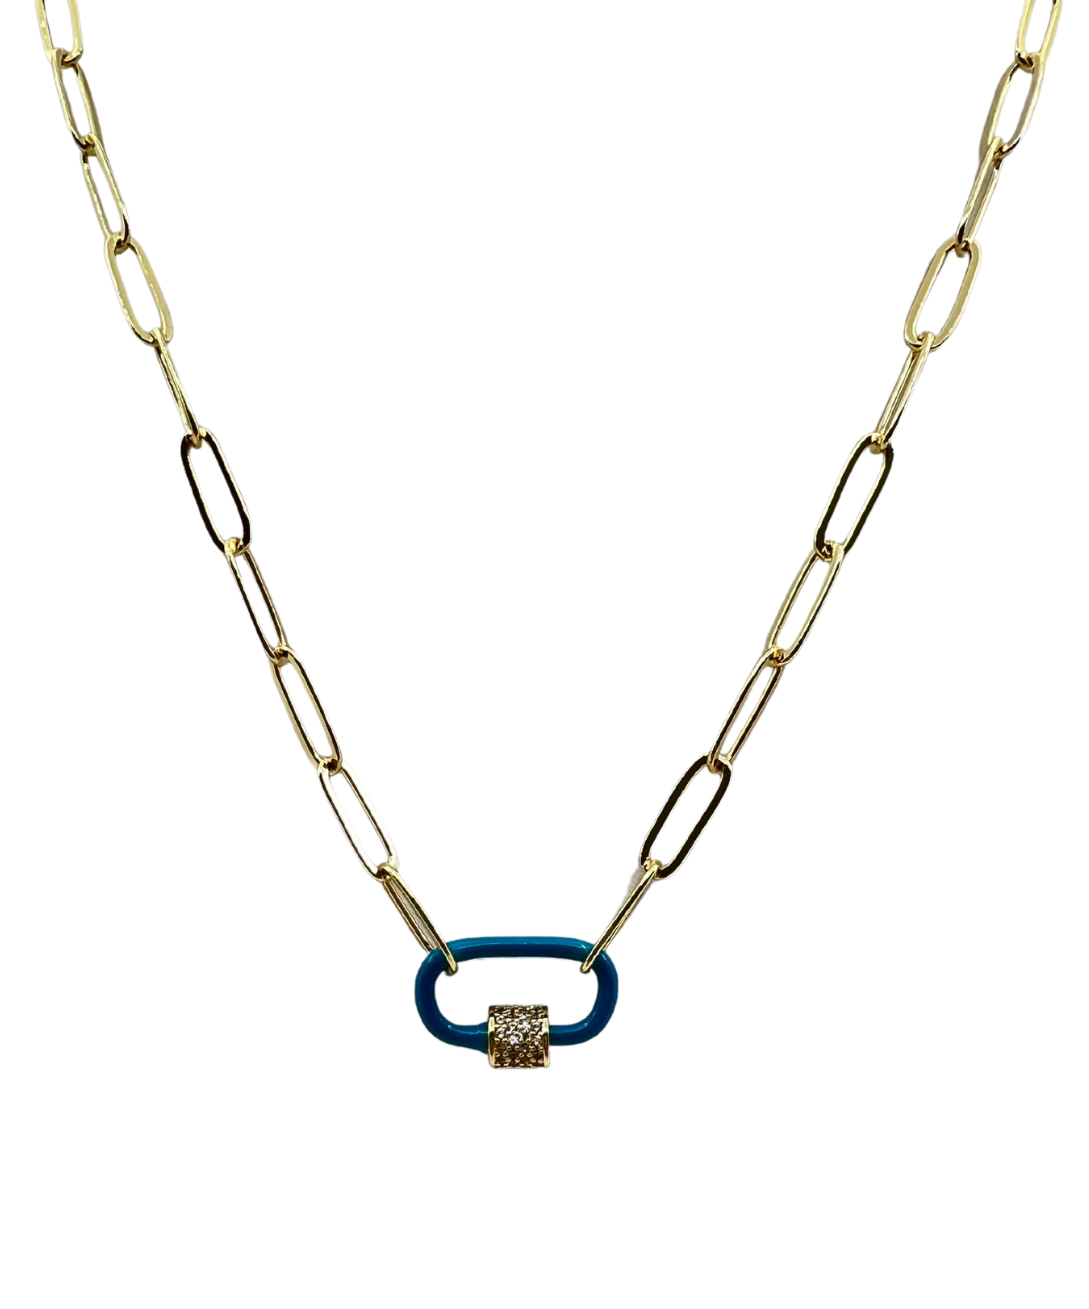 Gold Paperclip Chain Link Necklace - Blue Carabiner